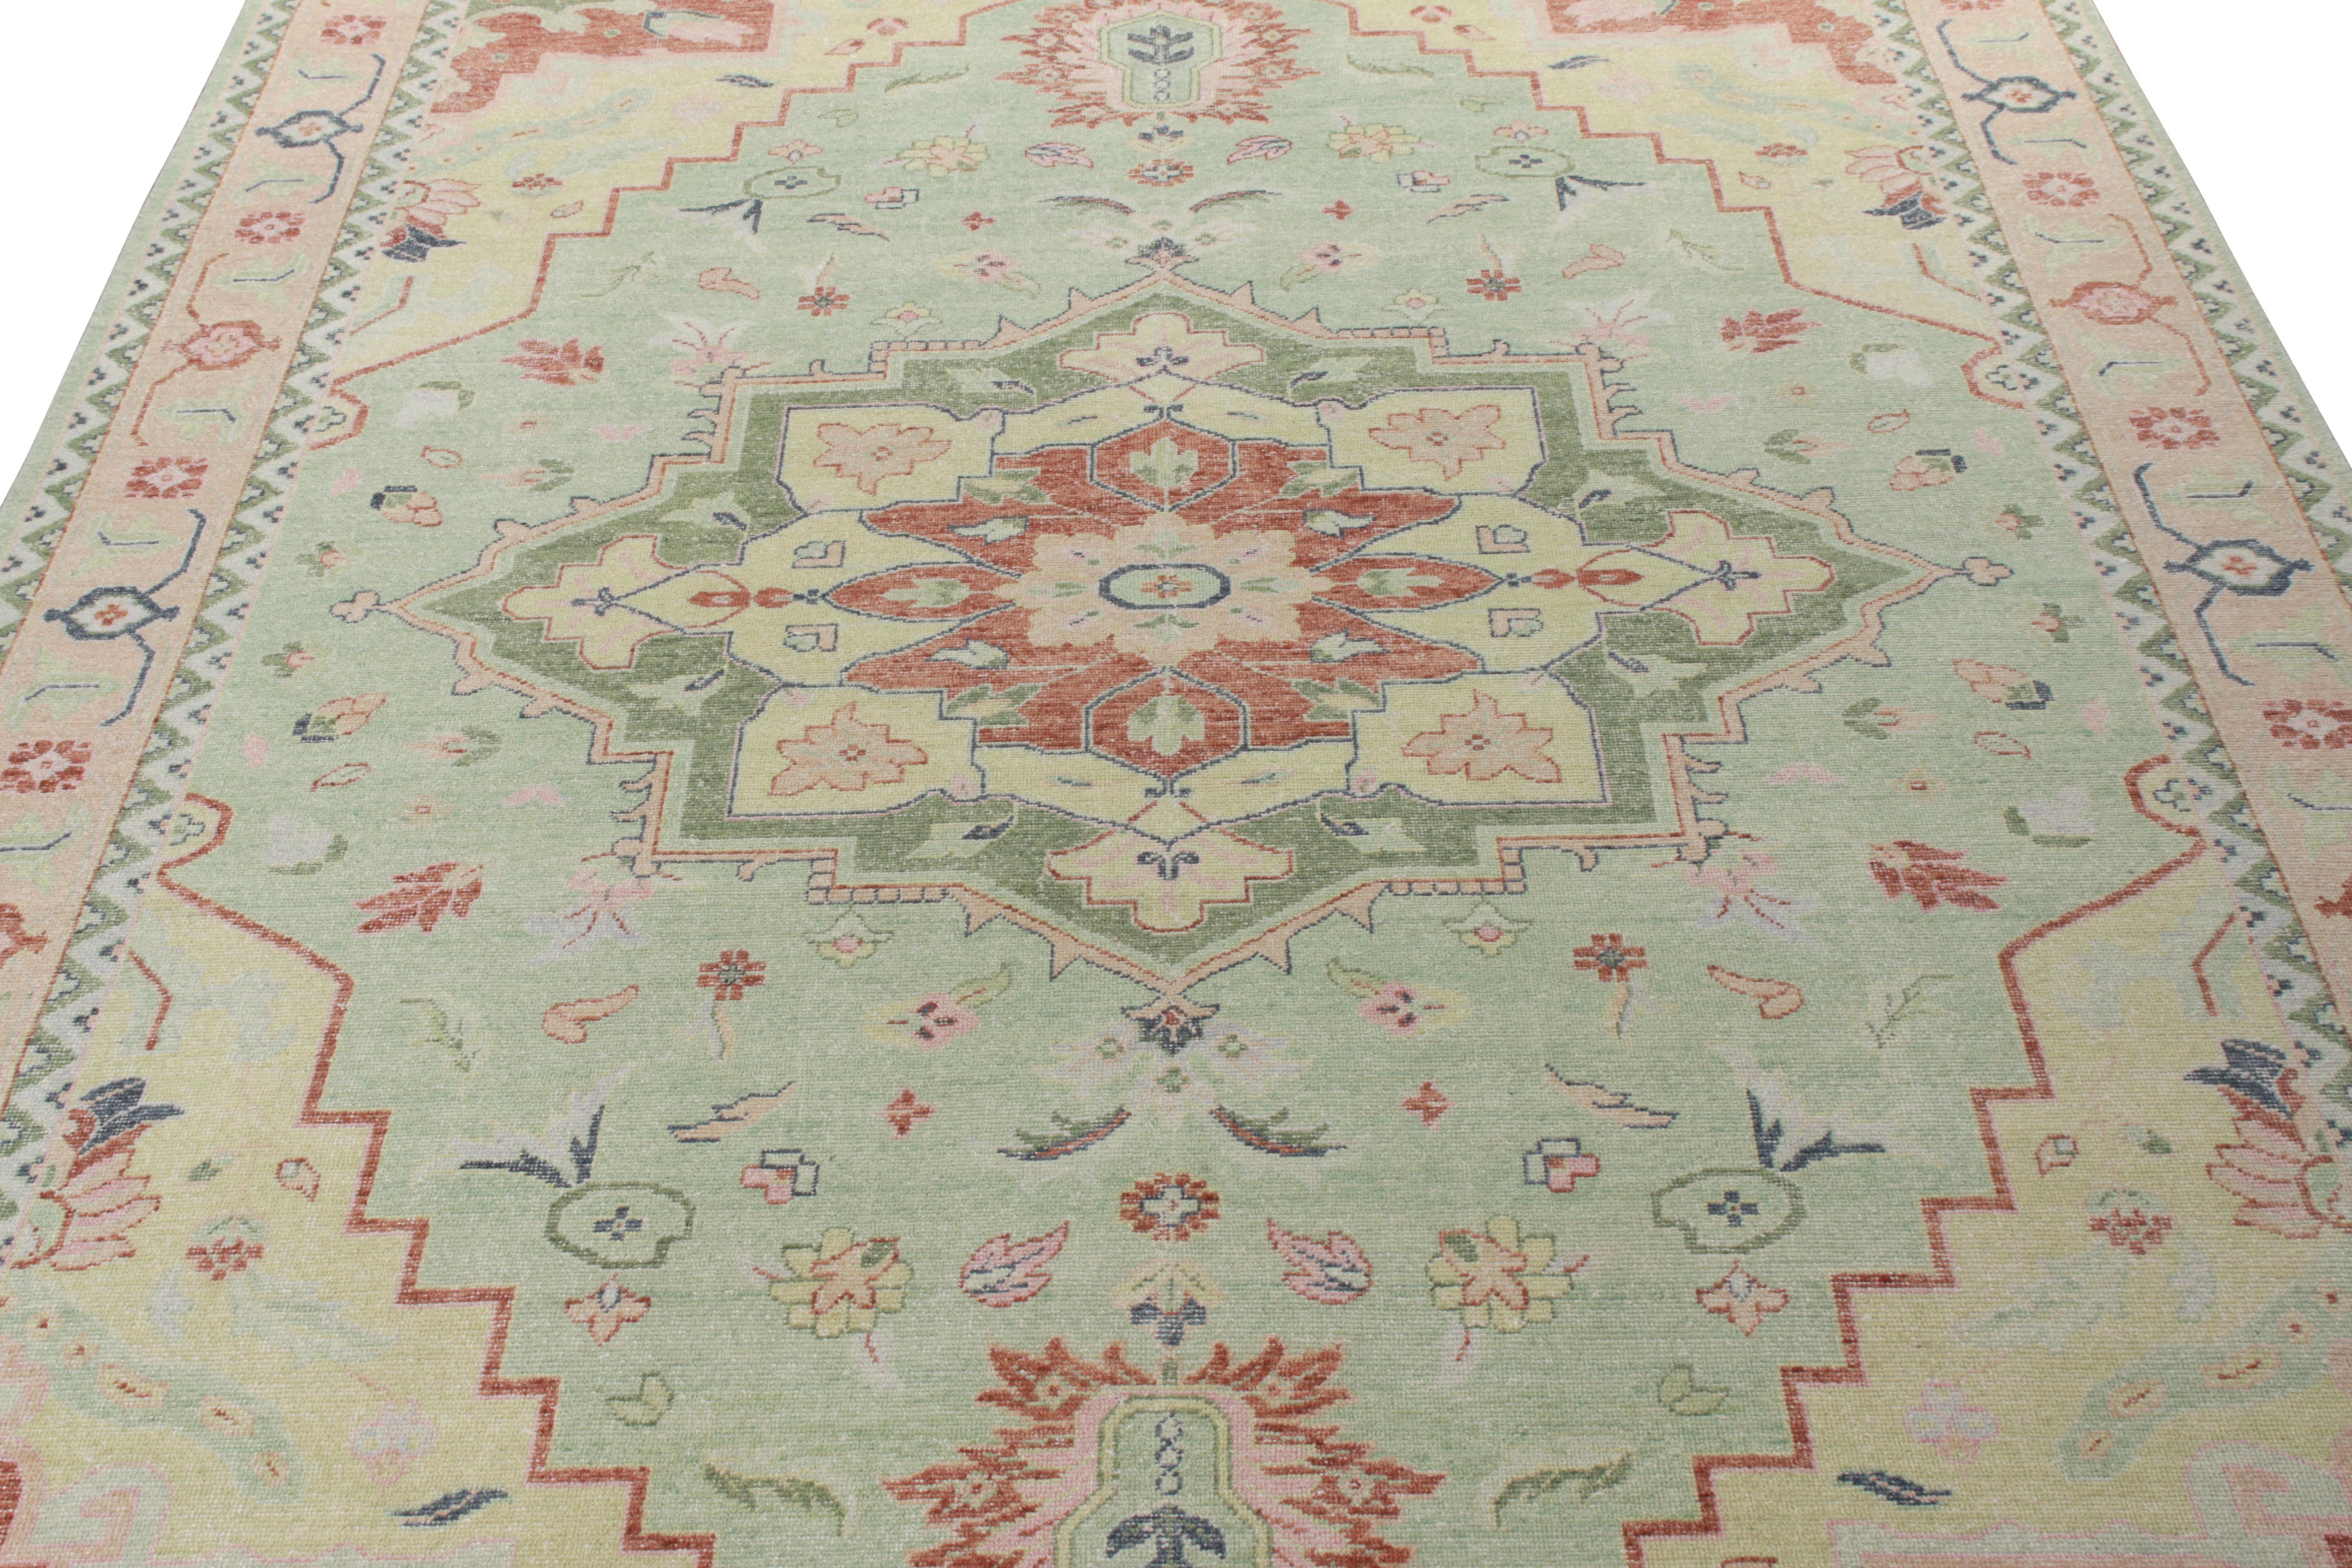 Rug & Kilim presents this 10x14 hand-knotted wool piece from its Homage Collection. Drawing inspiration from the most distinguished classic Heriz-Serapi rug sensibilities, the rug features a splendid medallion pattern in serene hues of green, pink